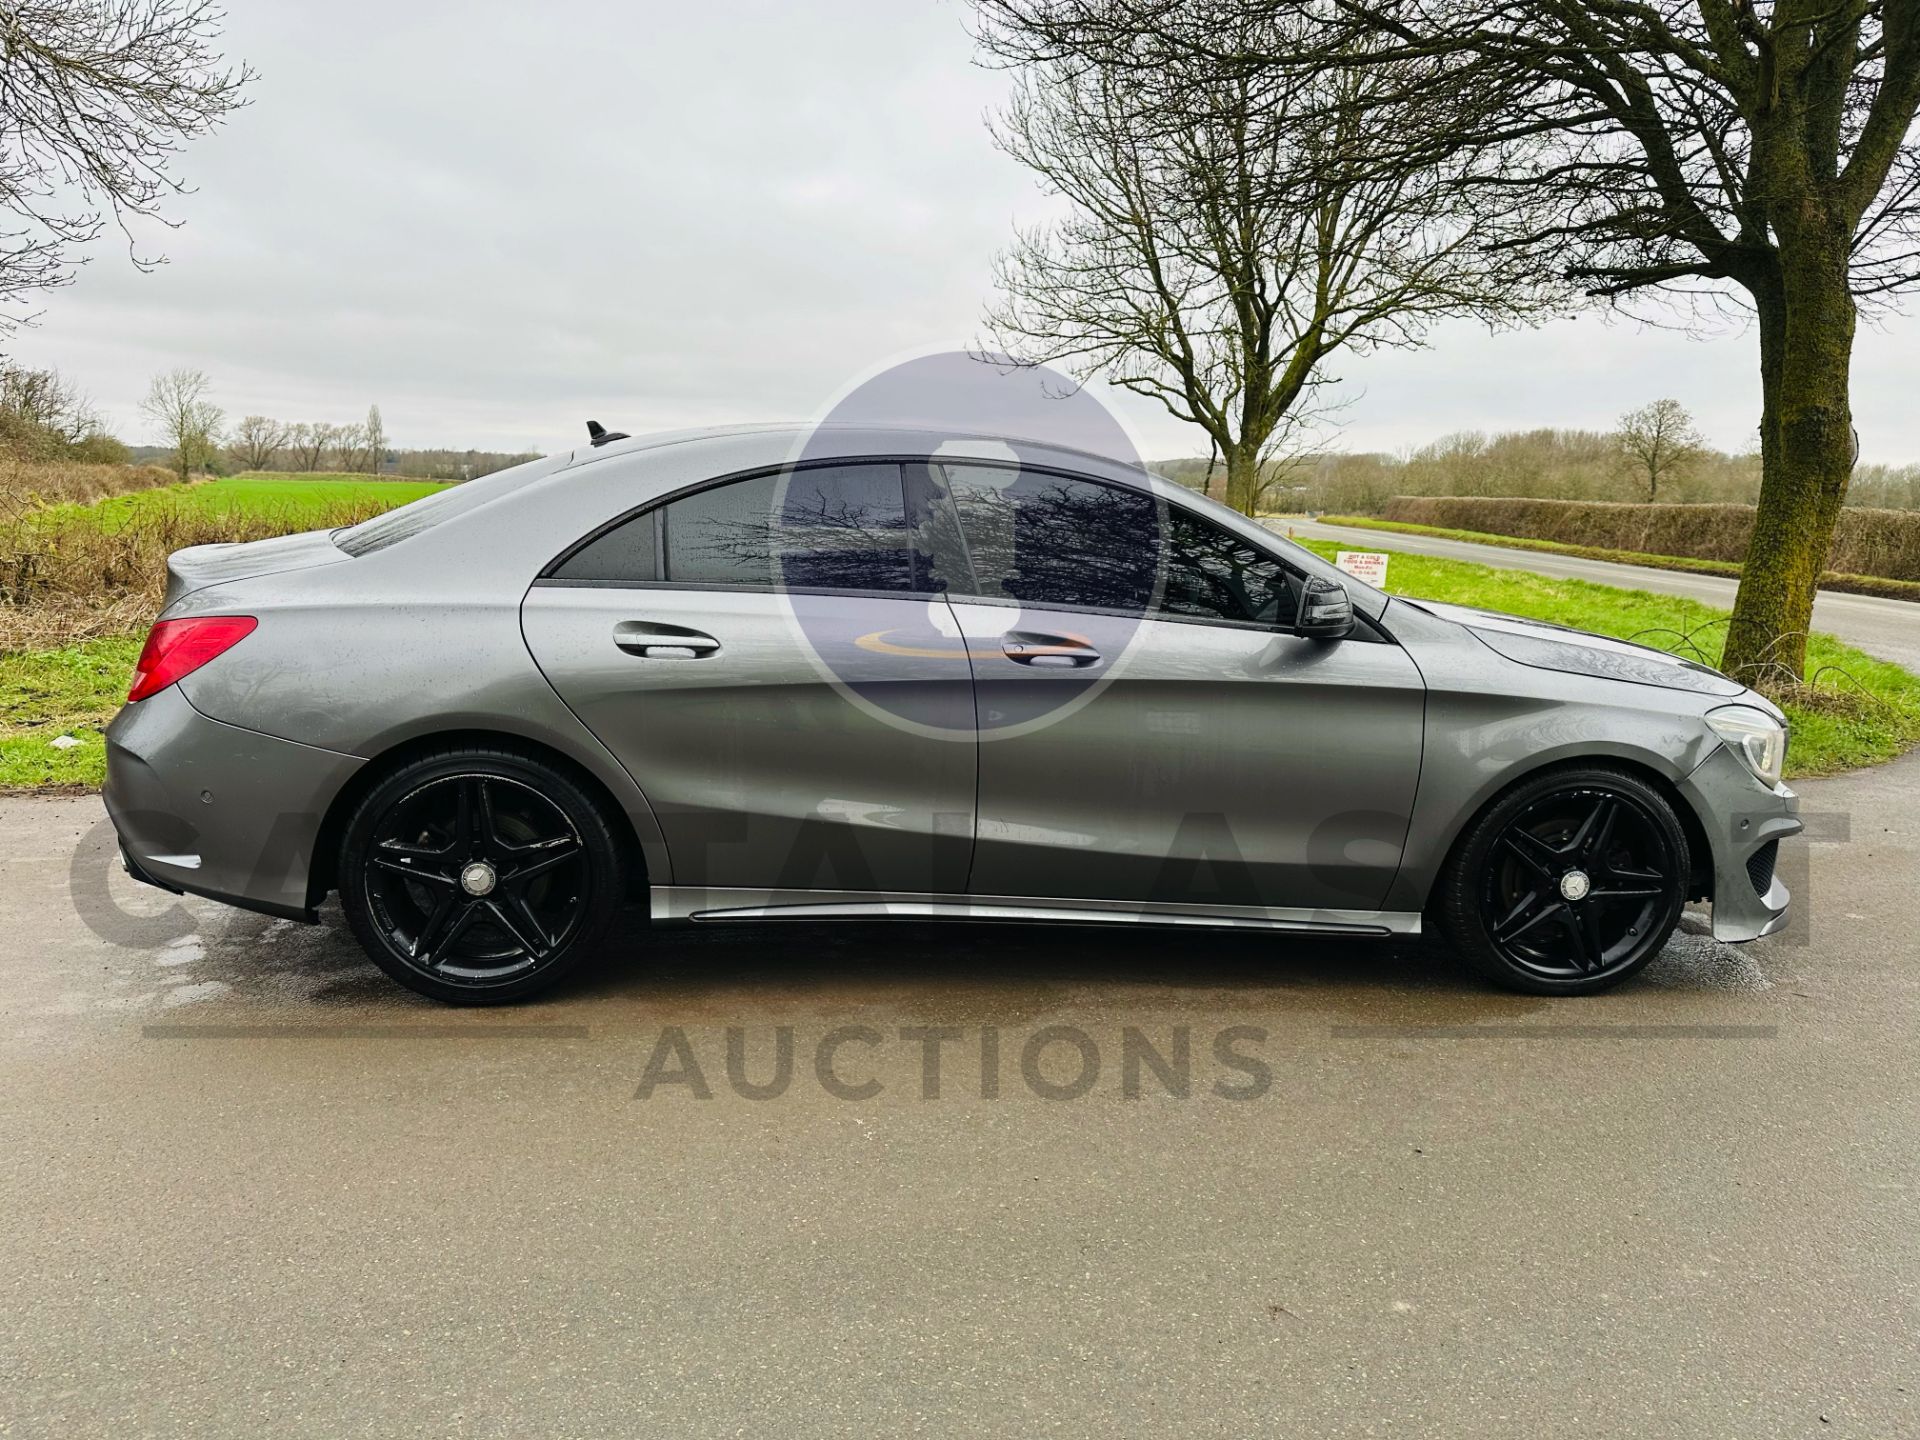 (ON SALE) MERCEDES-BENZ CLA 220 CDI *AMG SPORT* (7G - DCT AUTOMATIC) - 2015 MODEL - SERVICE HISTORY - Image 10 of 33